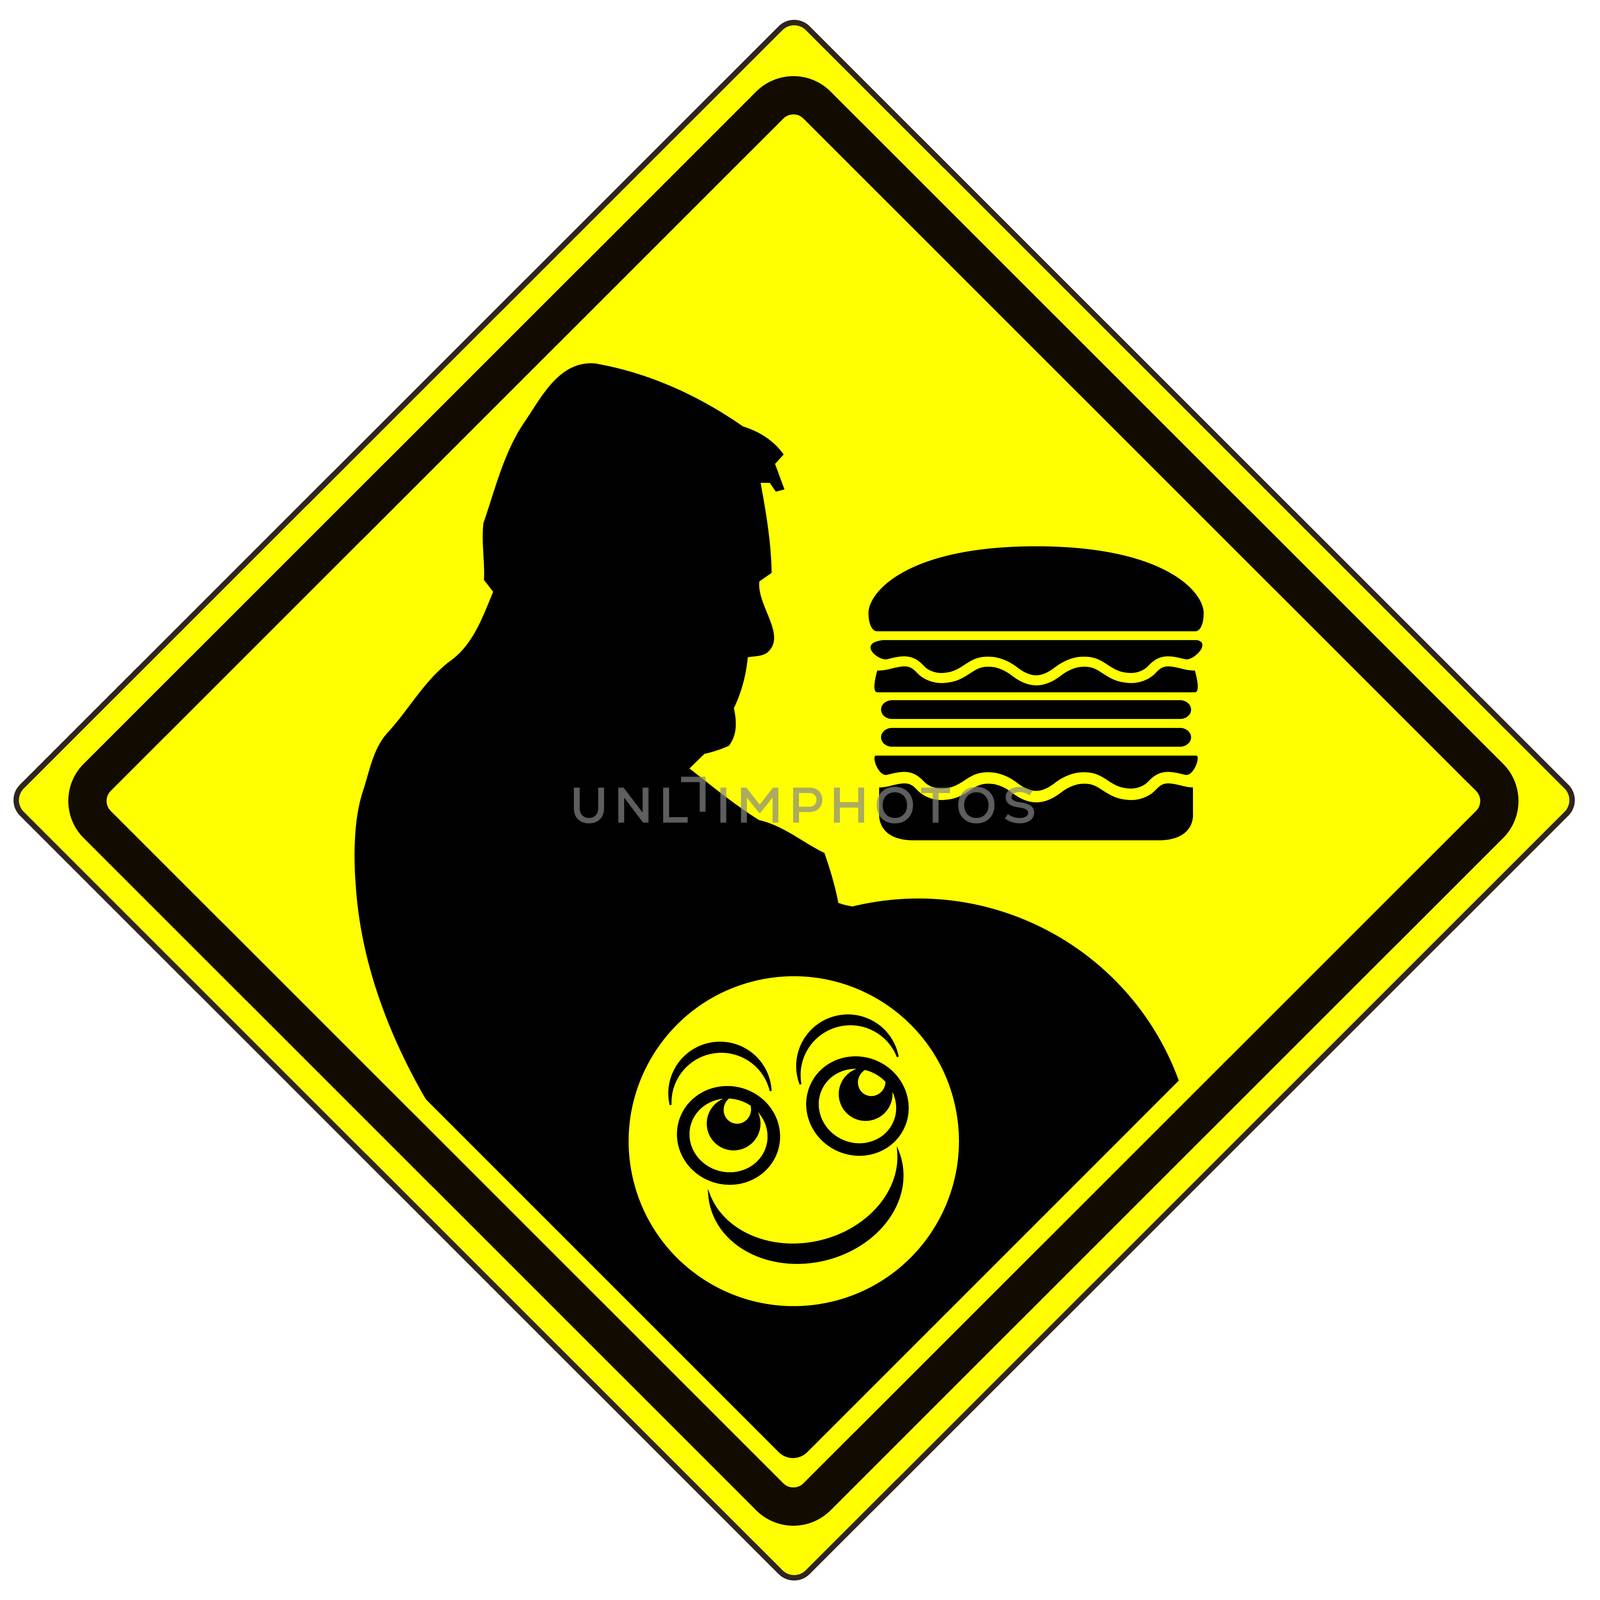 Humorous concept sign to avoid junk food and change eating habits